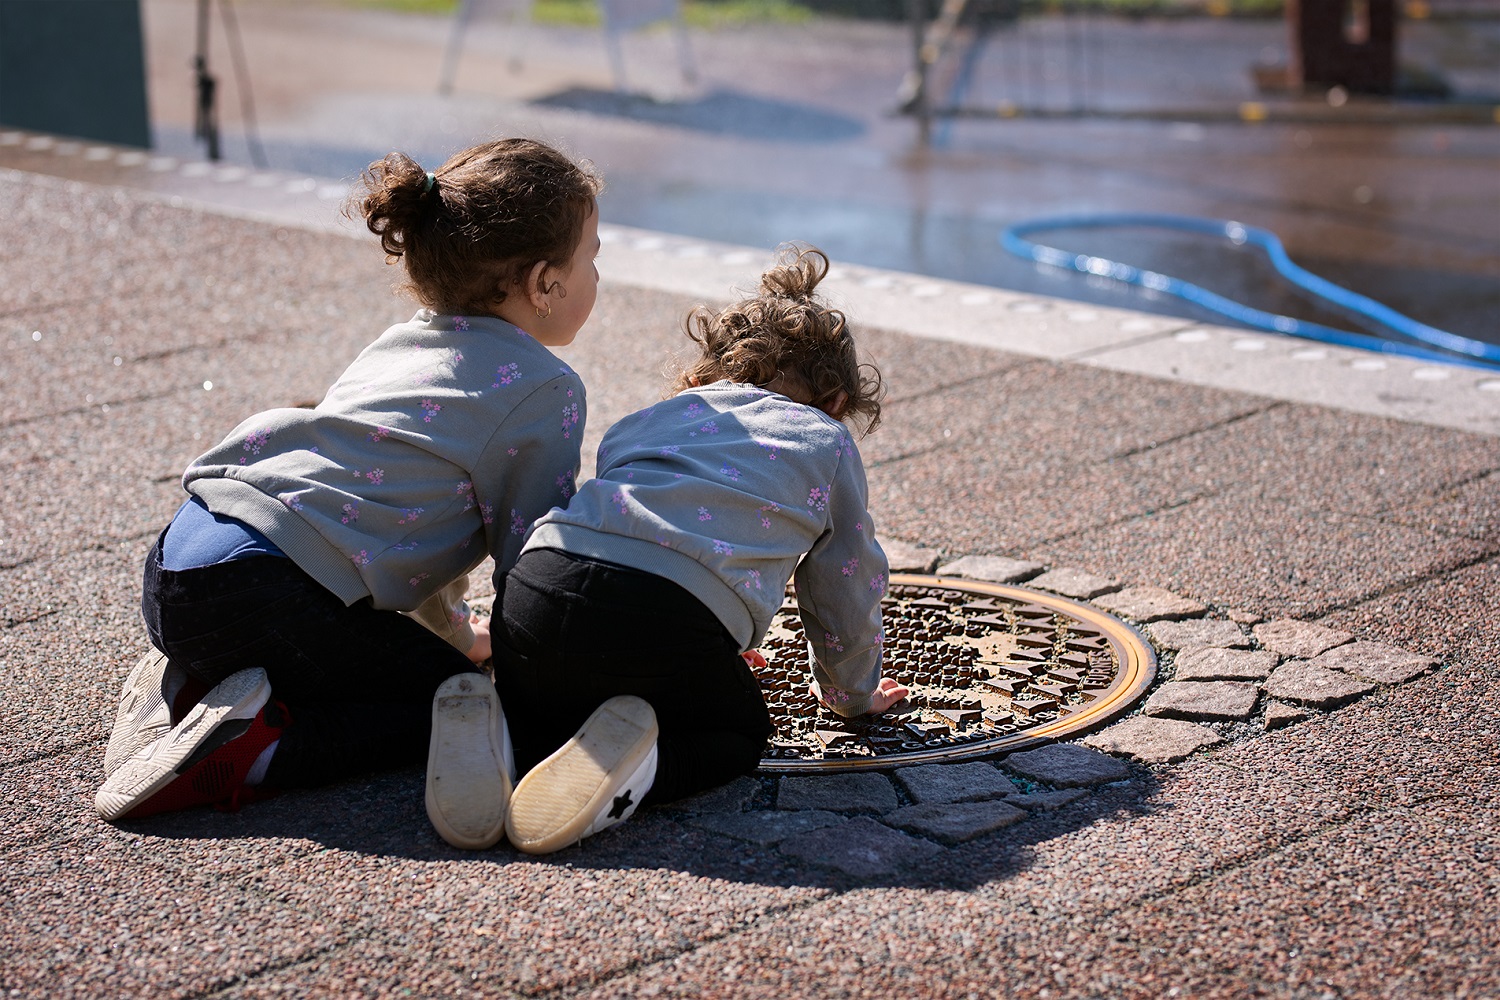 two young children reading manhole covers on a sunny city day.